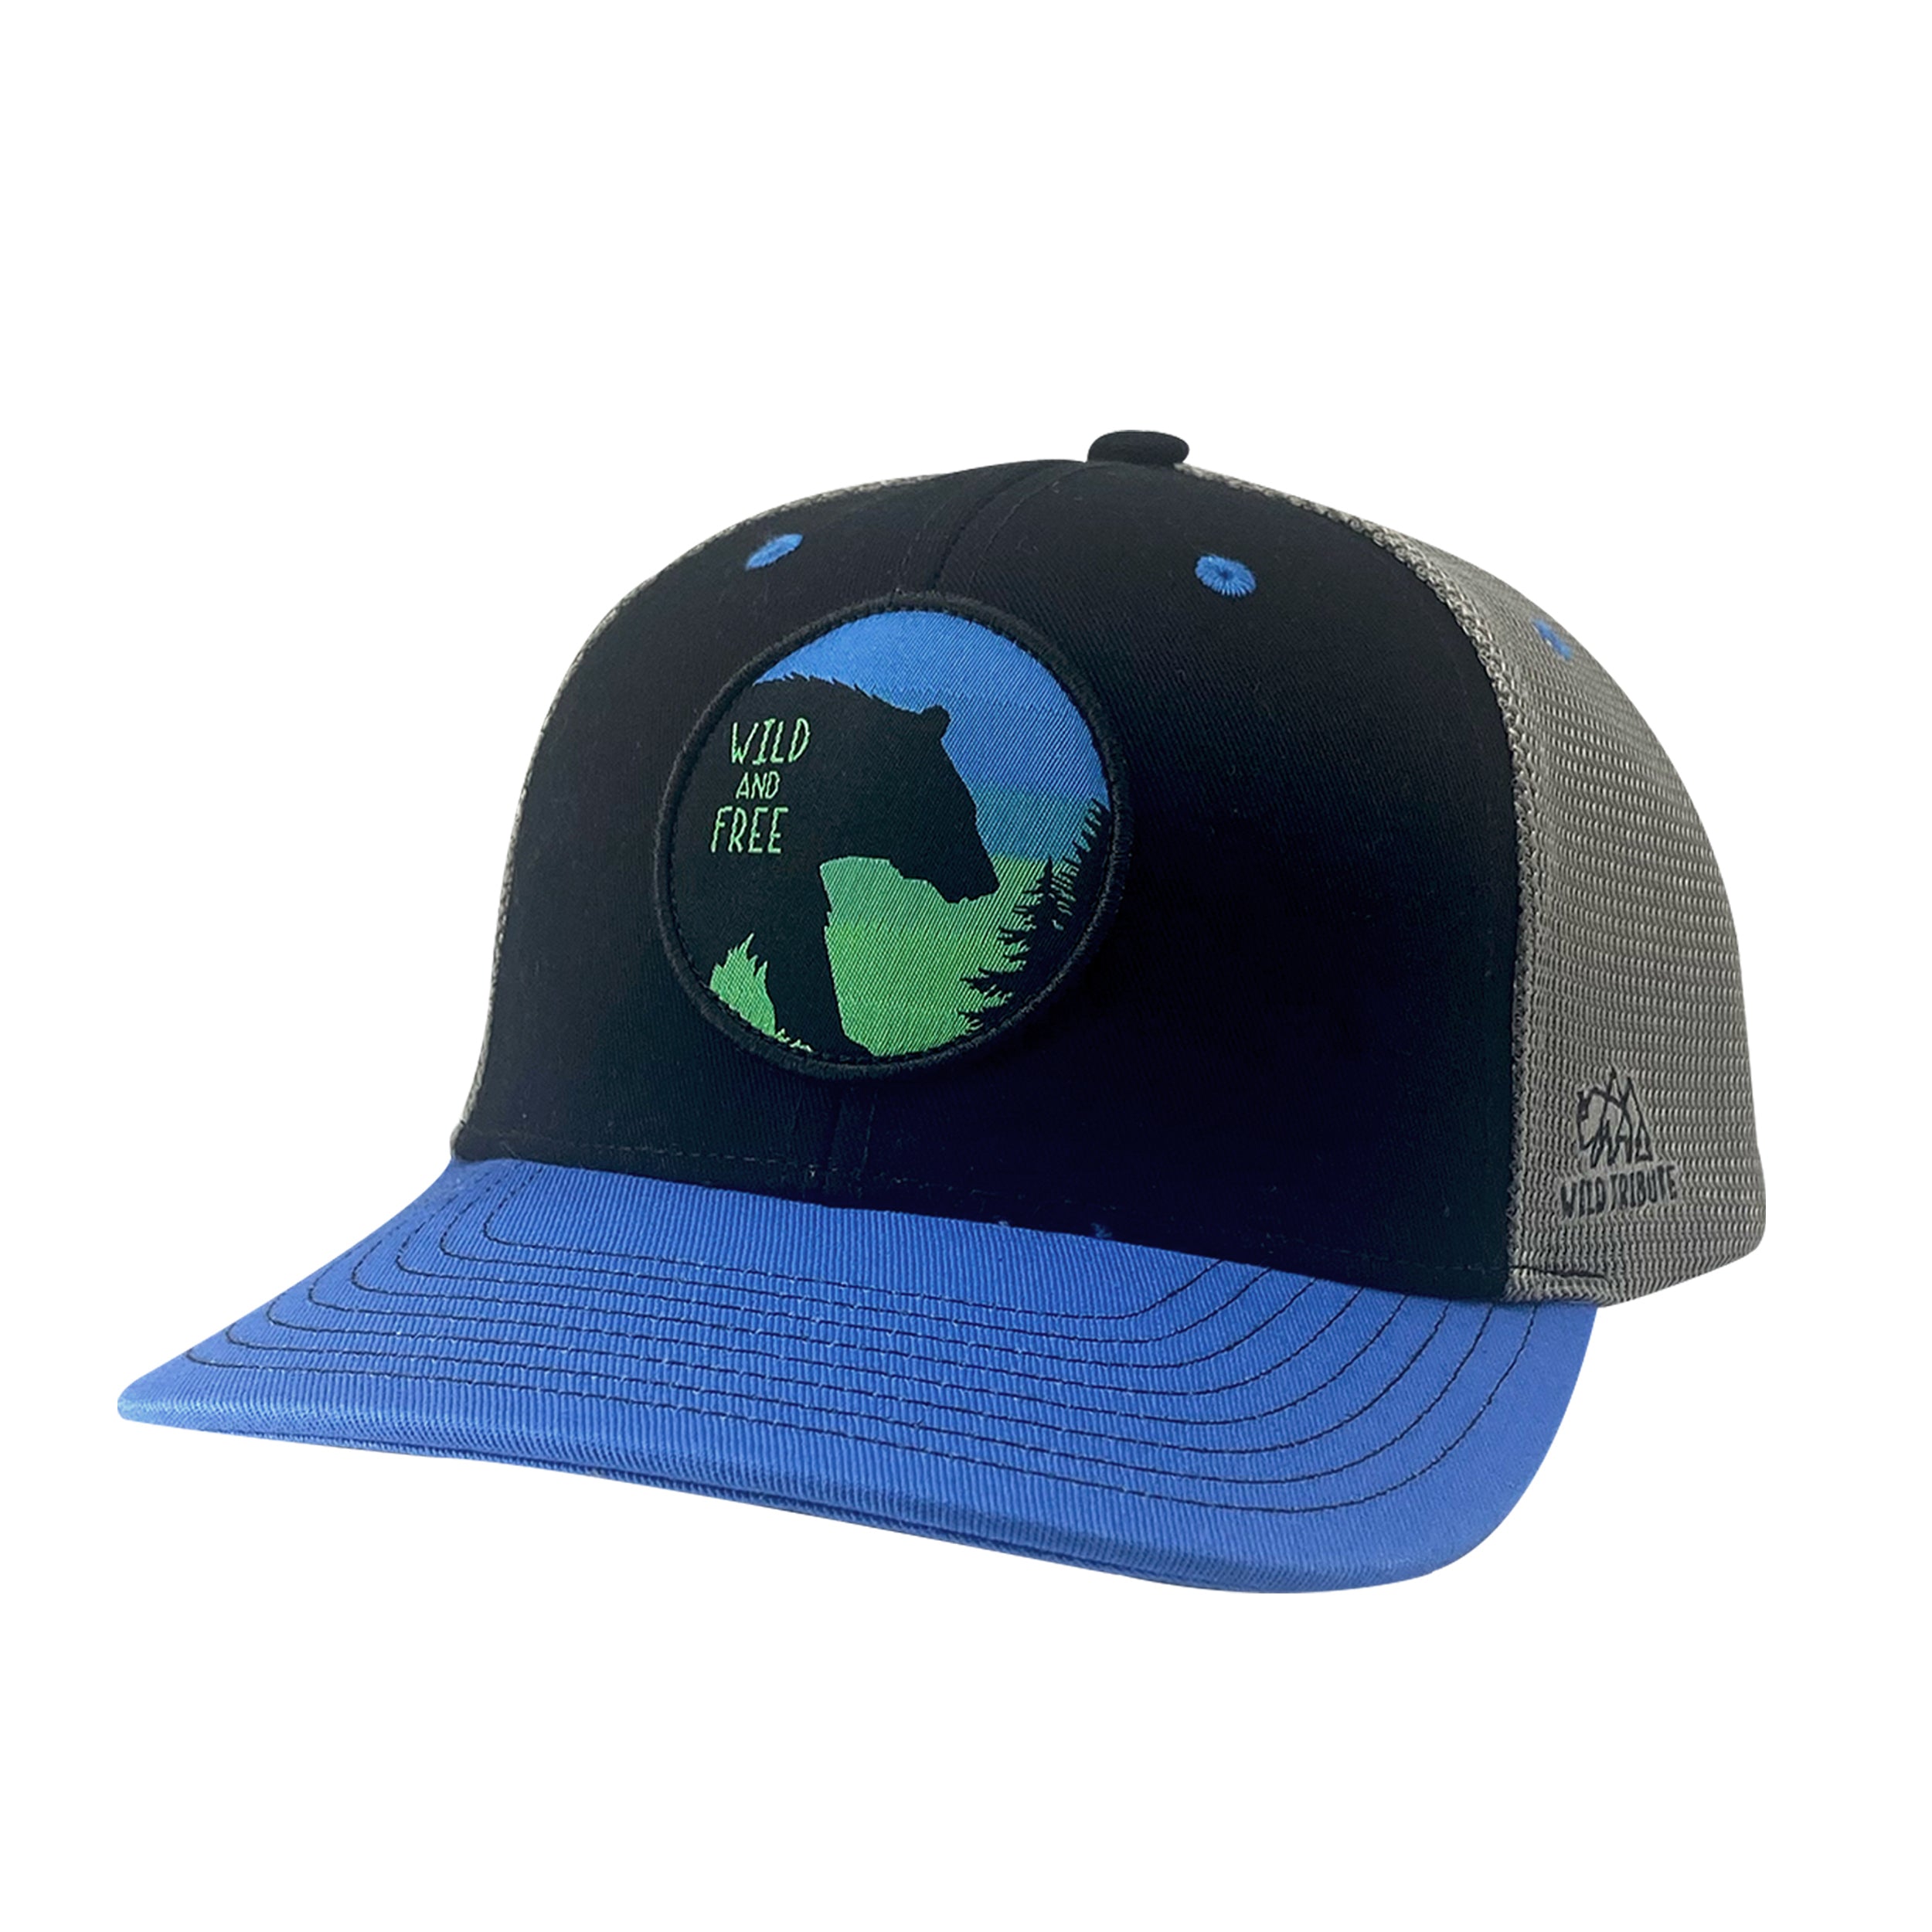 Wild and Free Hat - Blue/Black